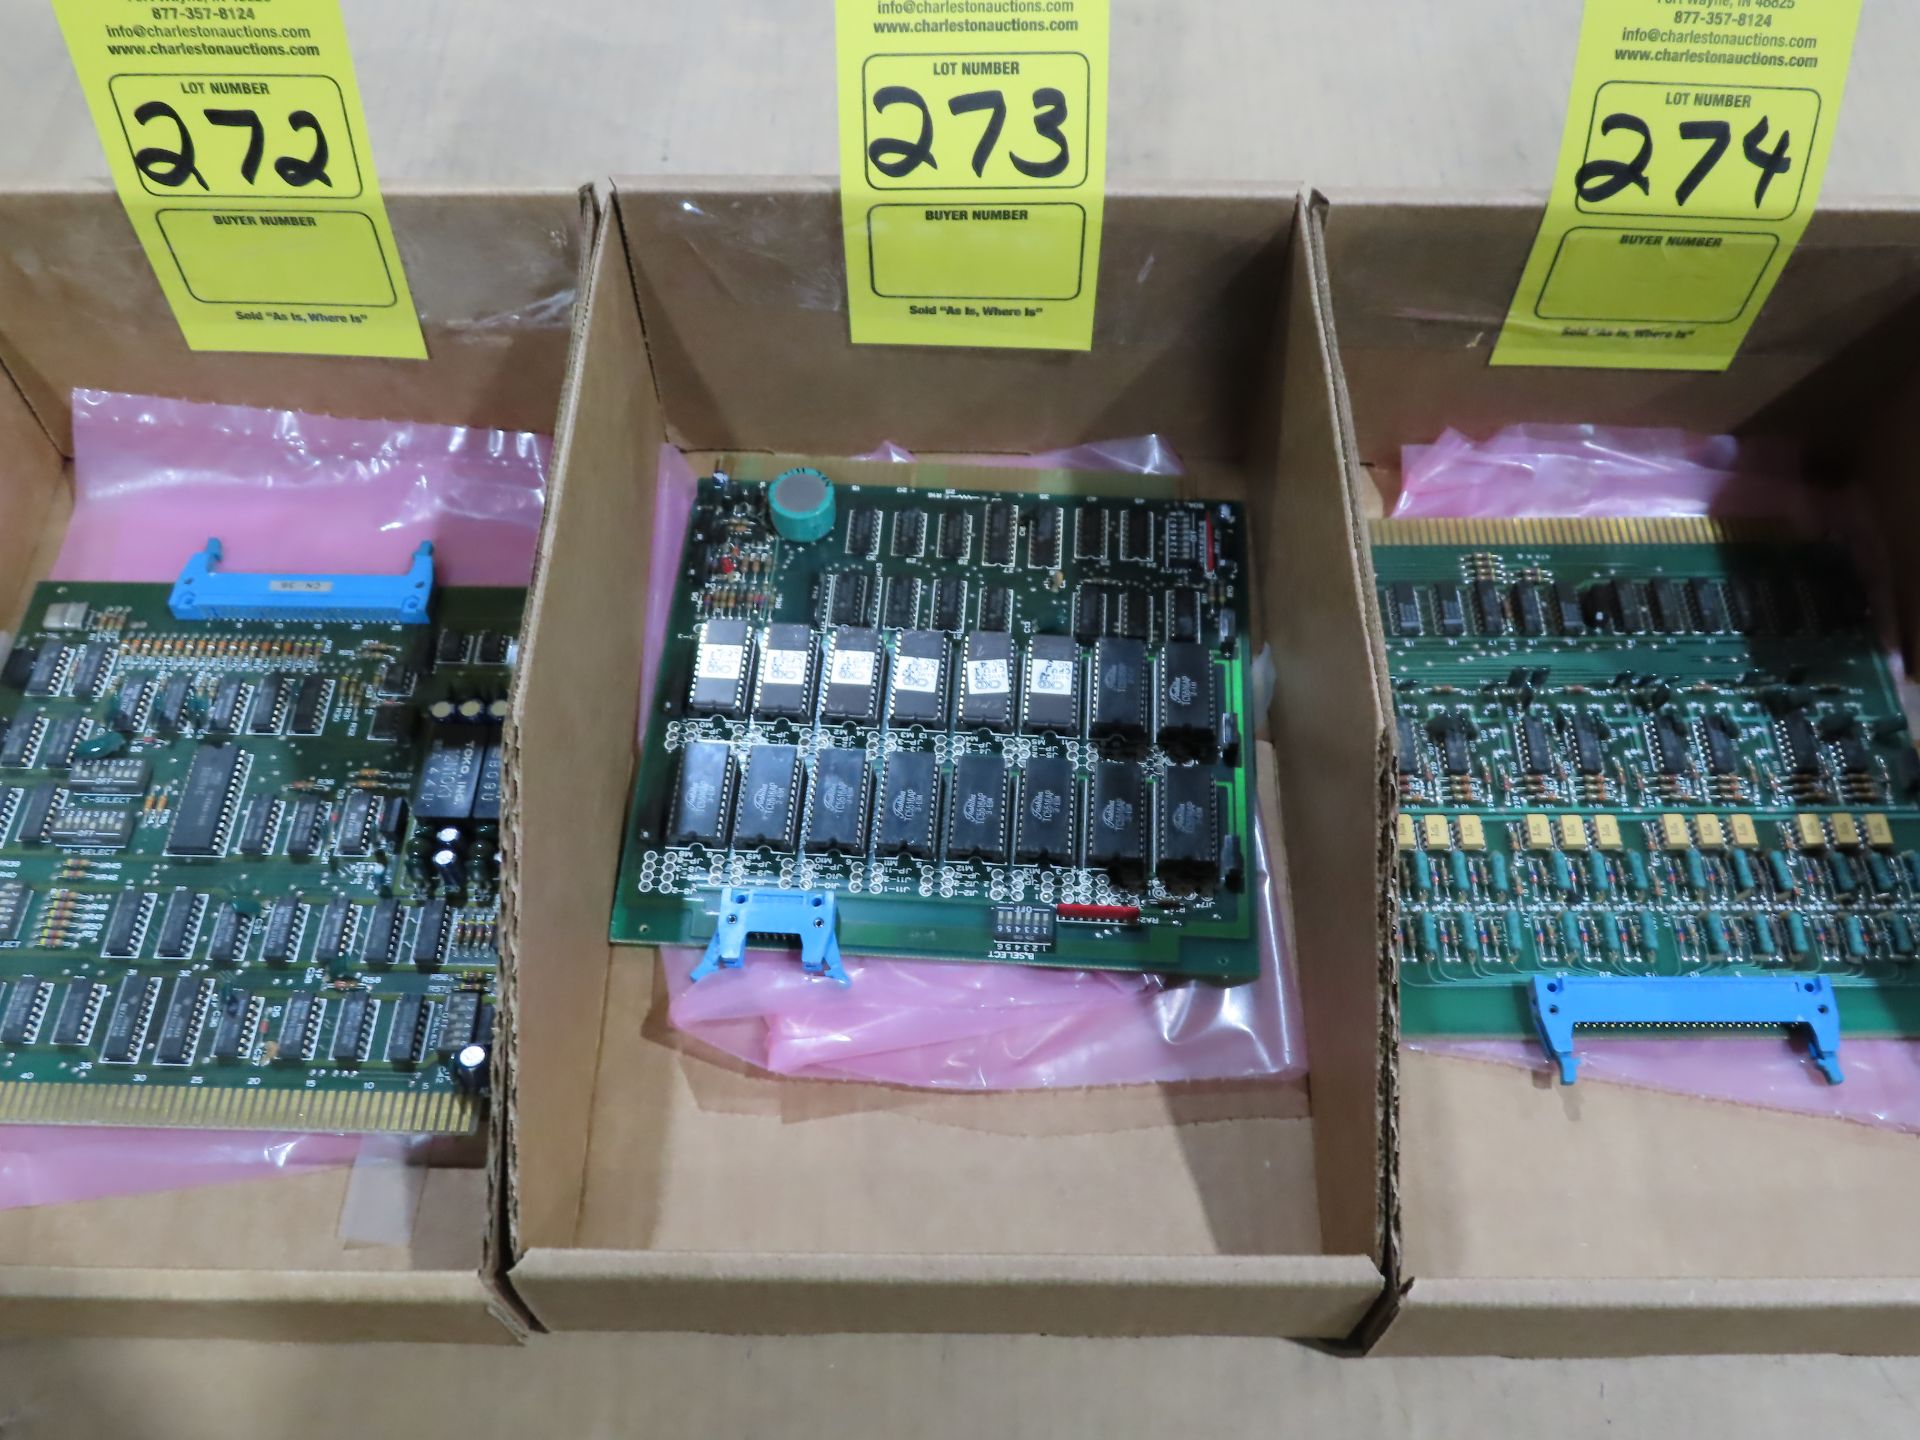 Hagiwara C-7704-1180E ME32 variable data card, as always, with Brolyn LLC auctions, all lots can